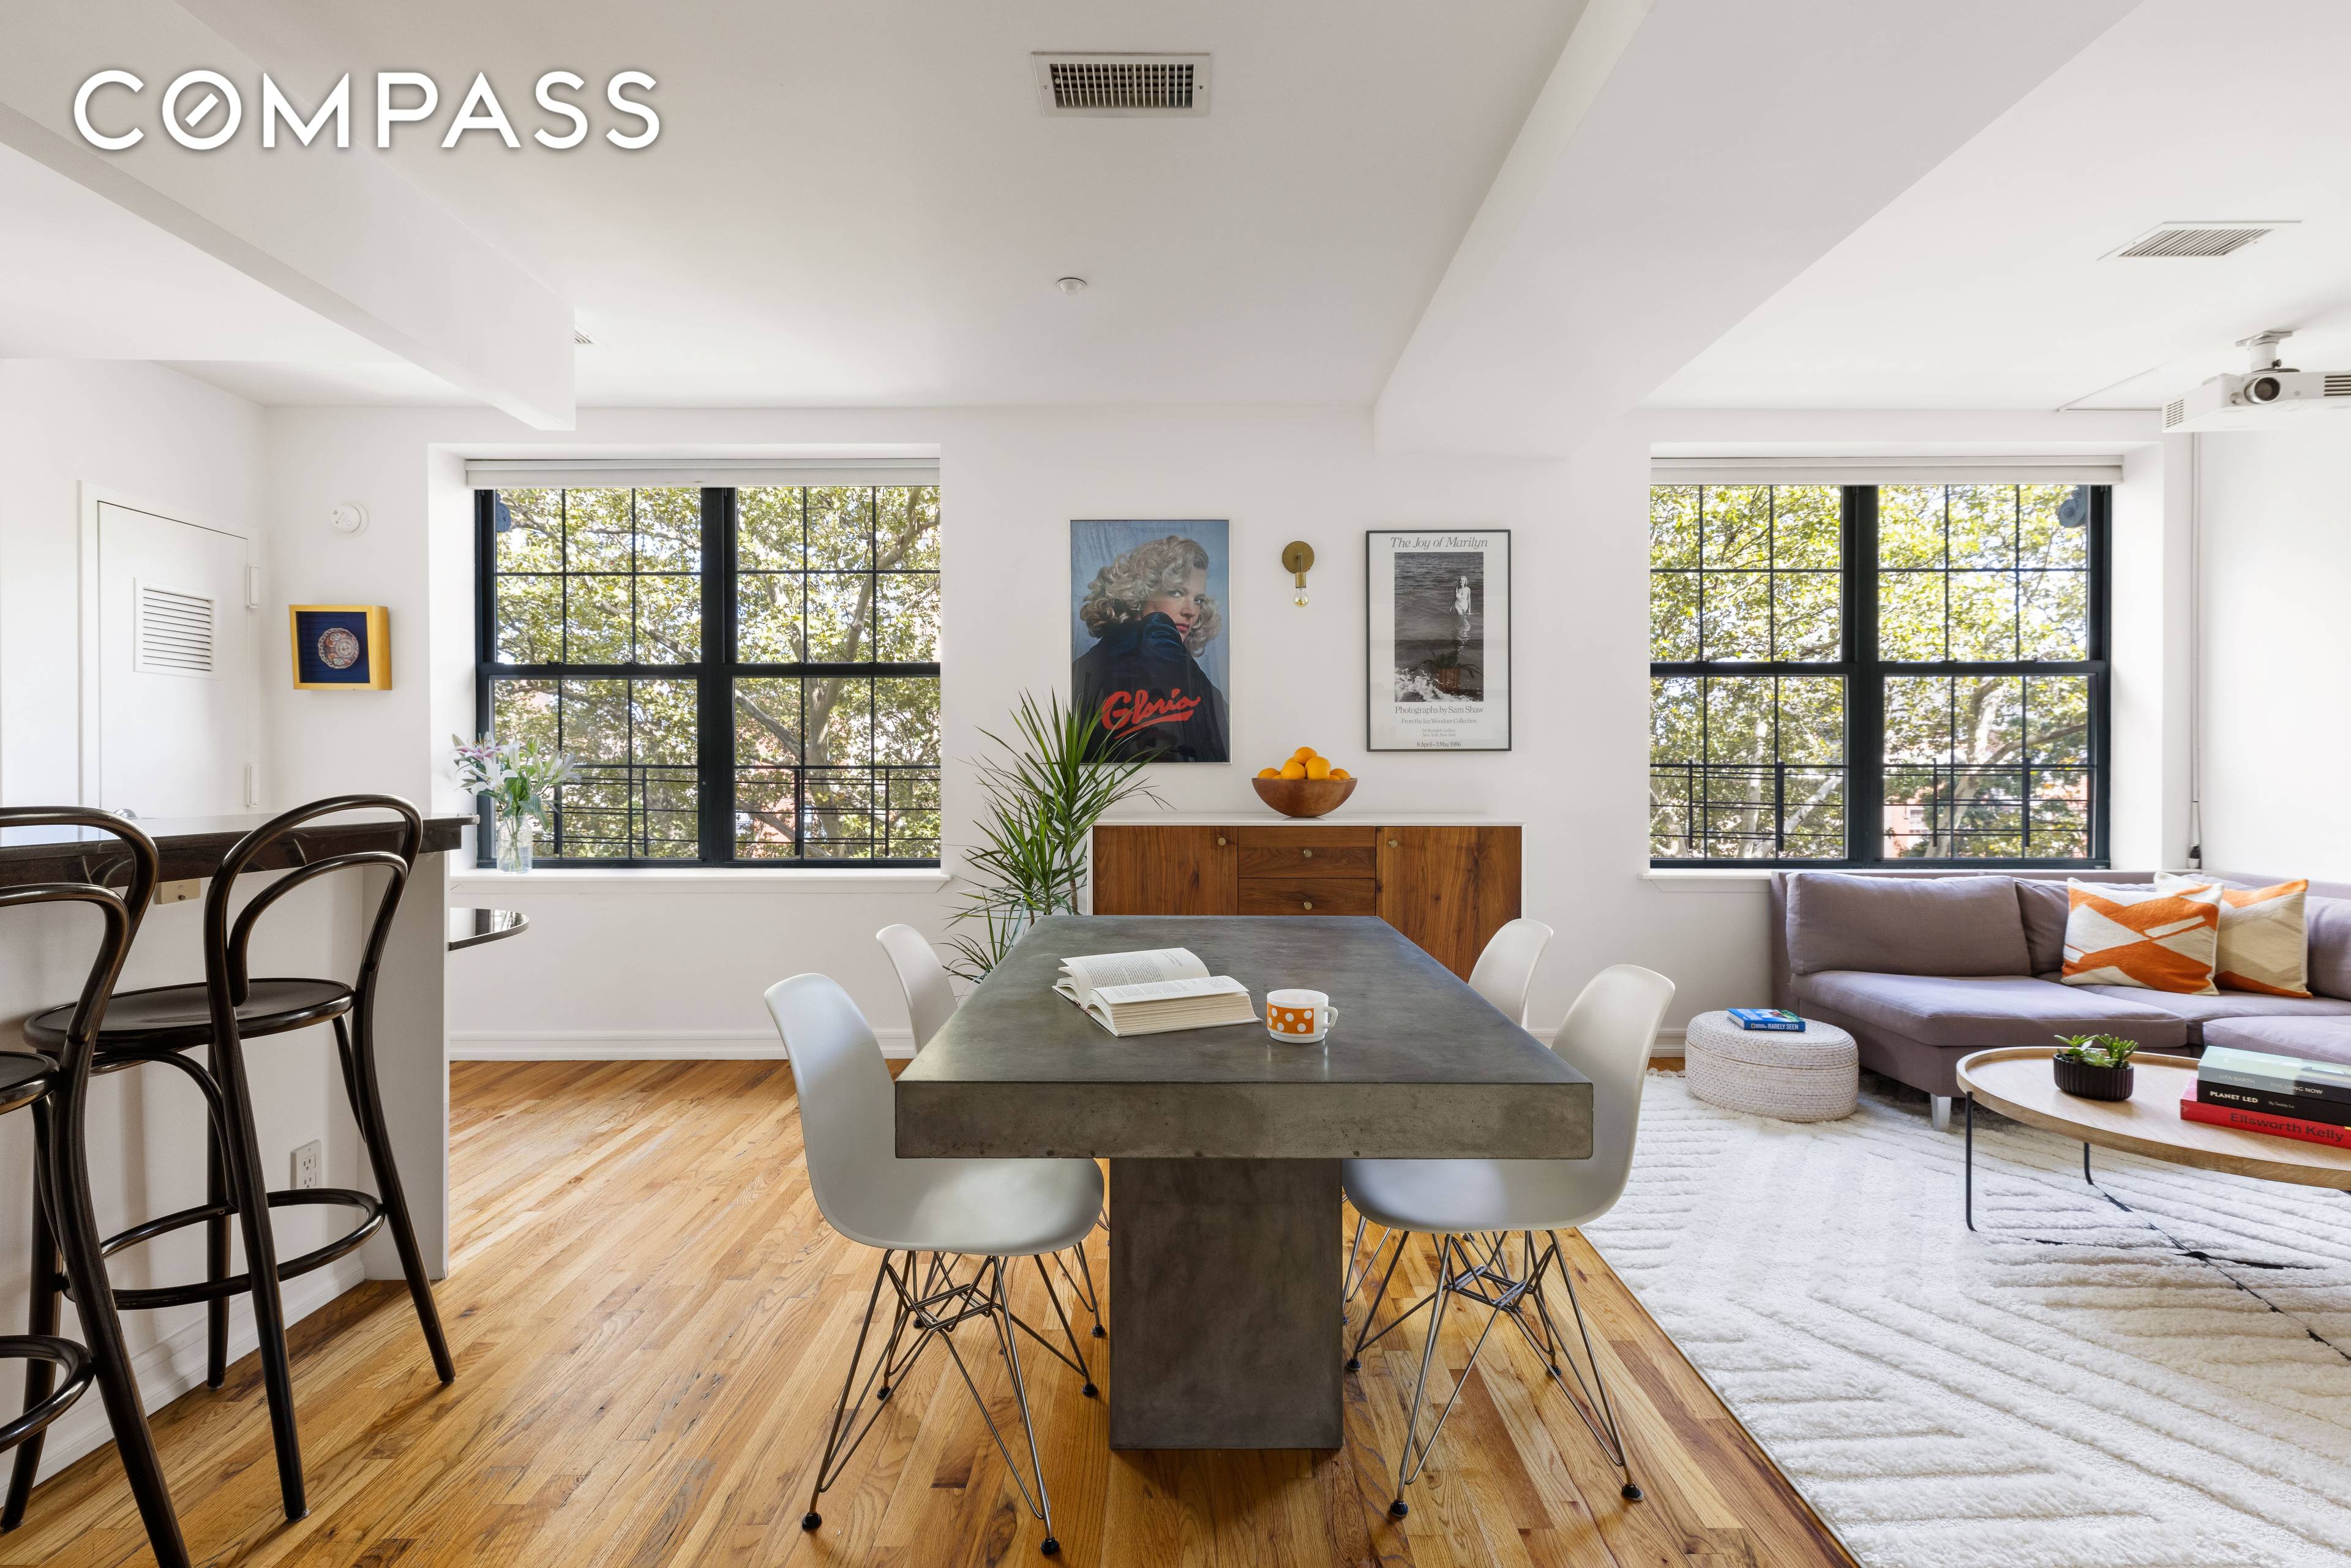 Introducing 320 Washington Ave, a stunning condo located in the heart of Clinton Hill, Brooklyn.